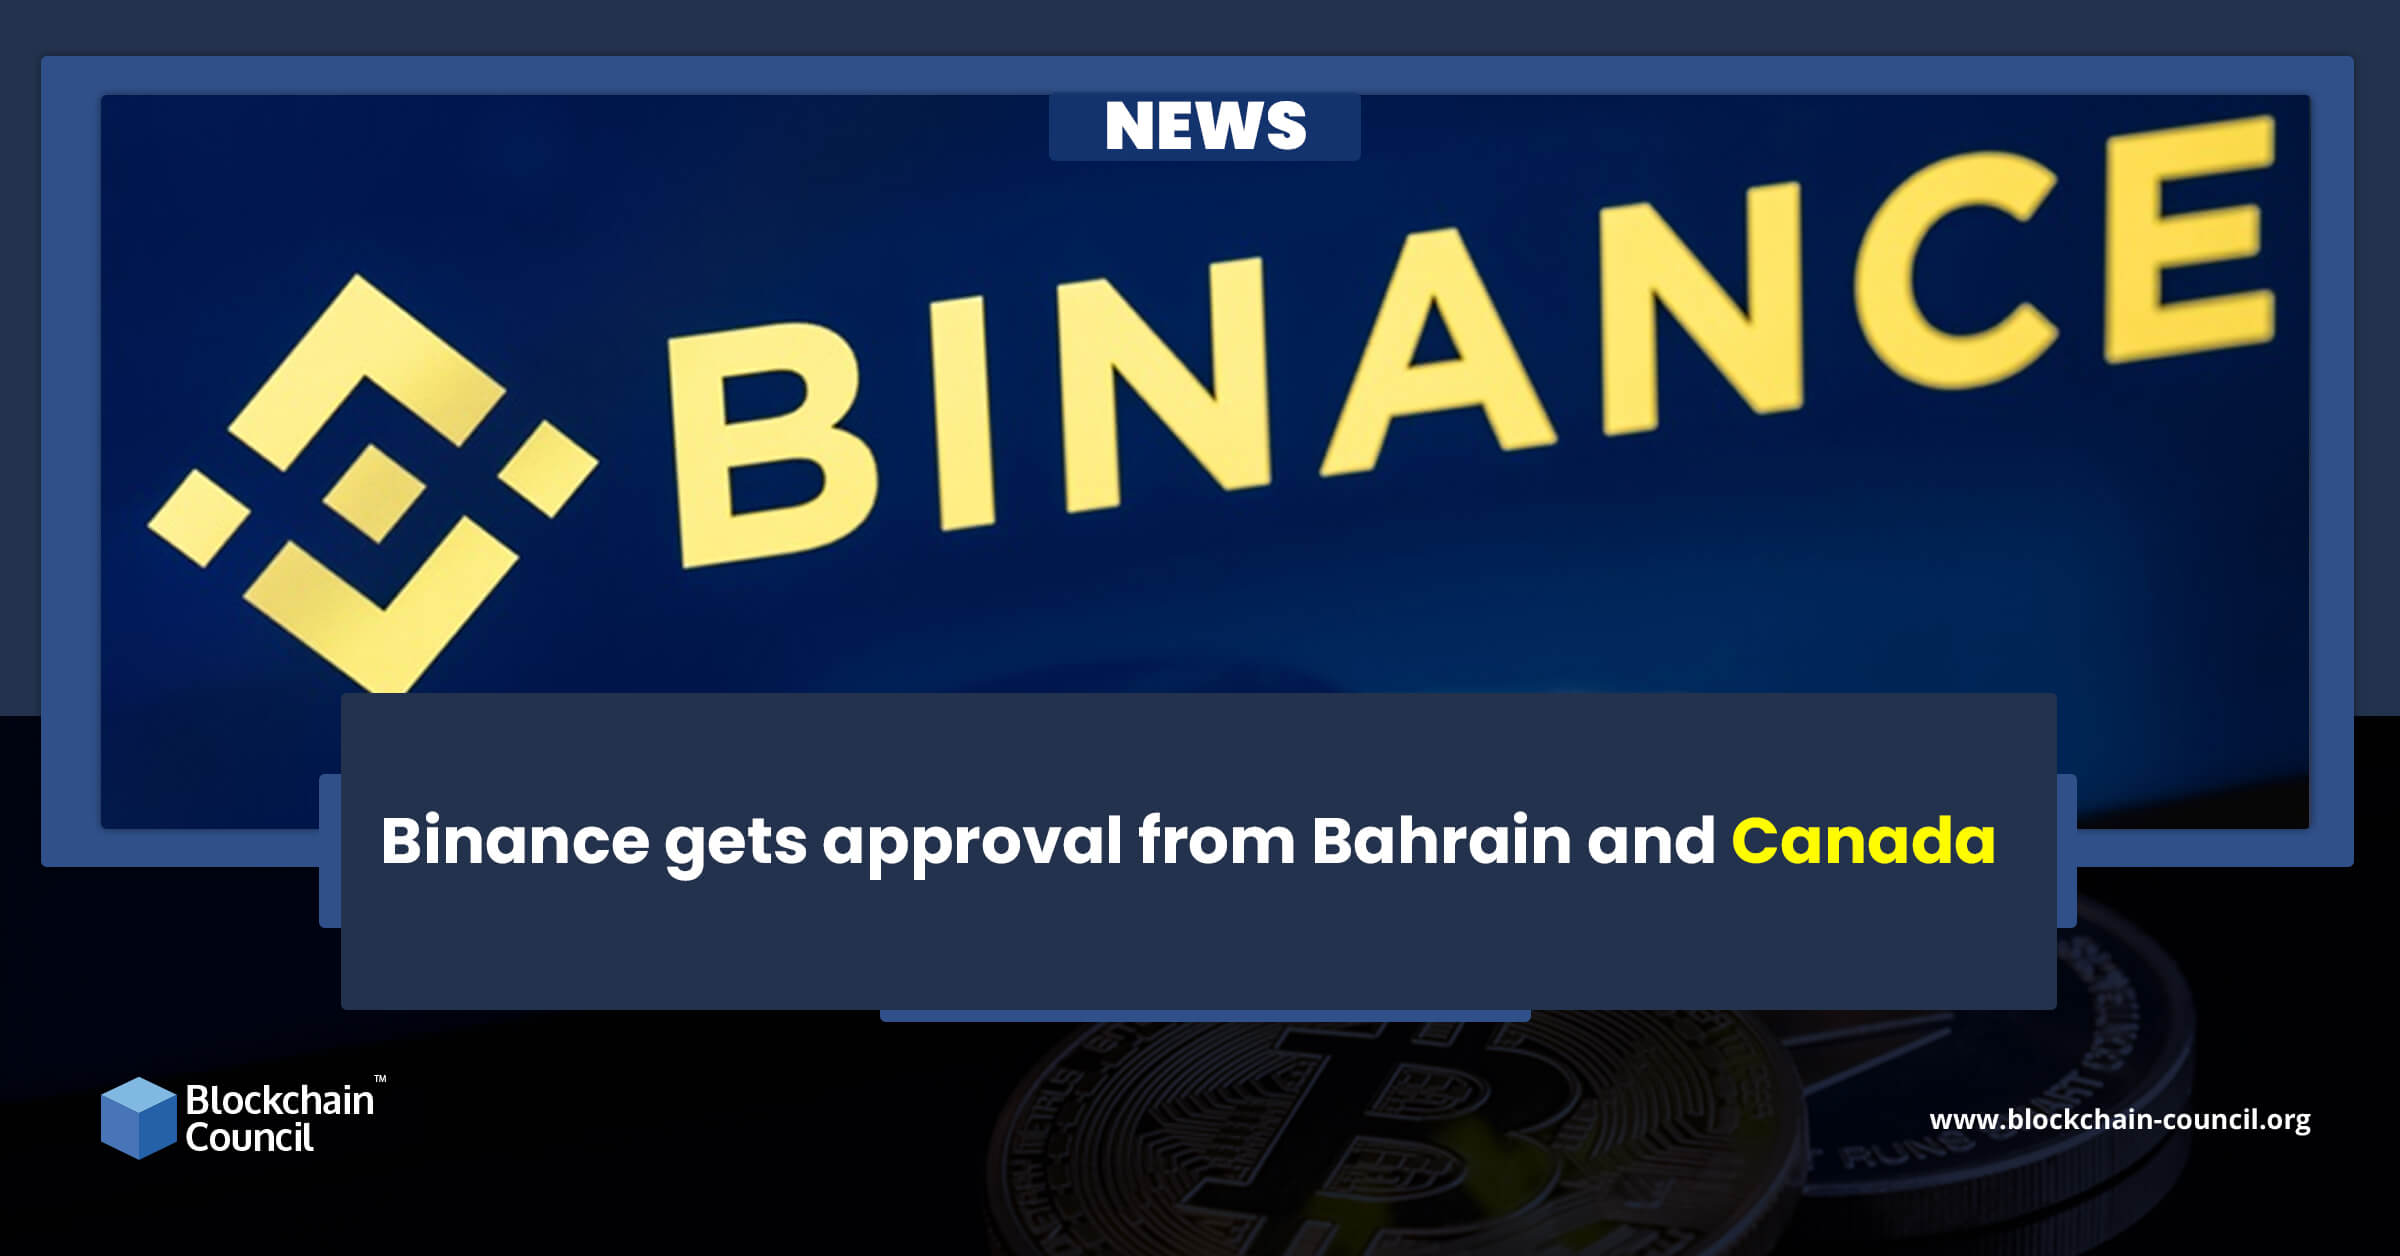 Binance gets approval from Bahrain and Canada news emailer